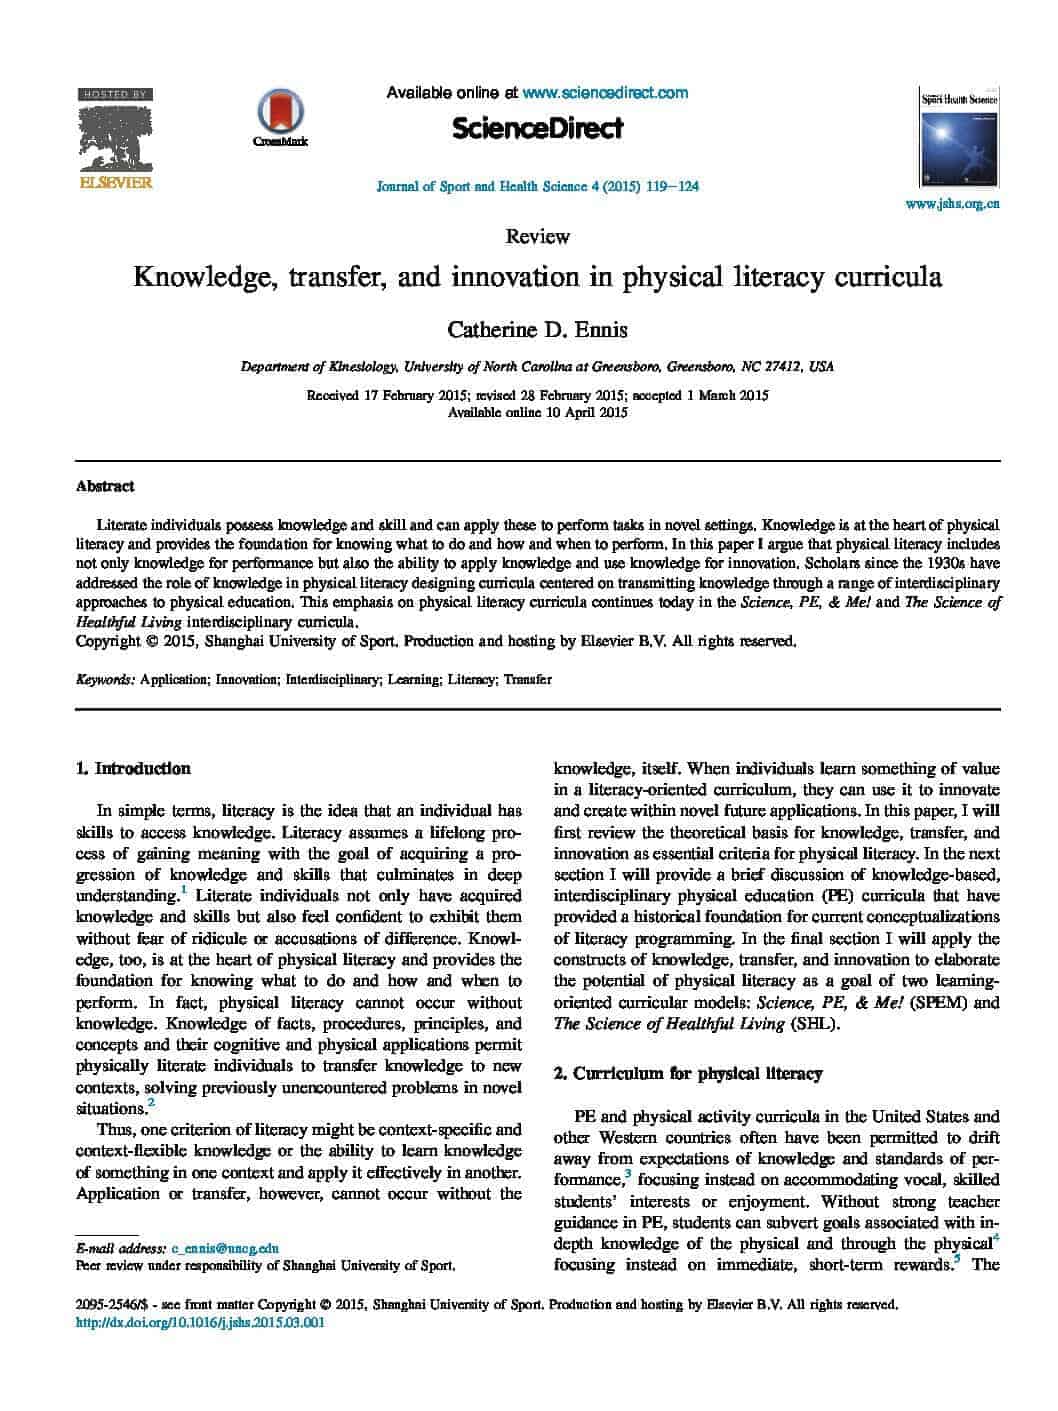 Knowledge, transfer, and innovation in physical literacy curricula